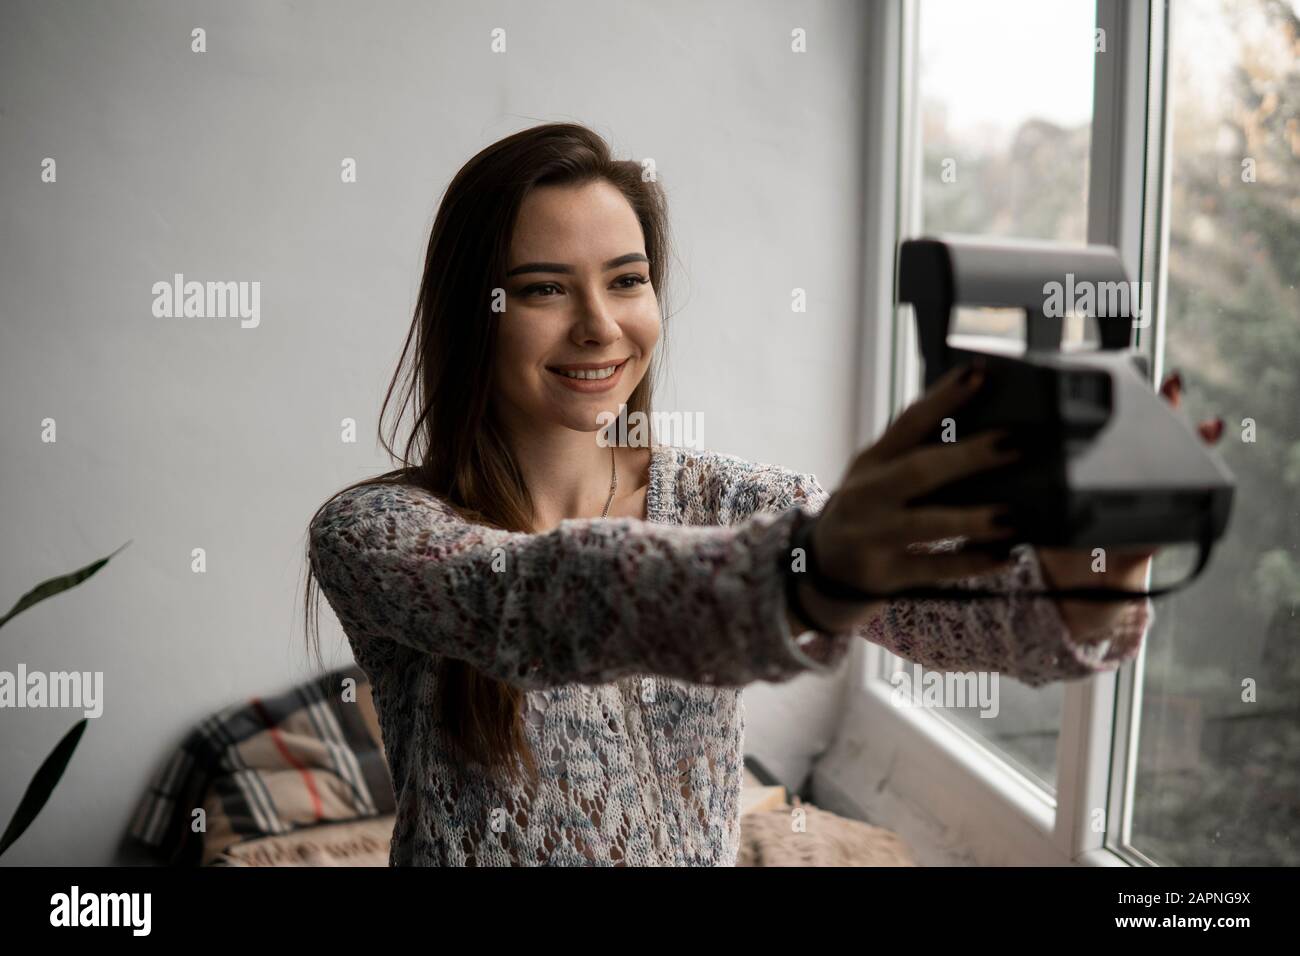 Smiling young brunette woman takes photographs selfie portrait with old photo camera. Stock Photo